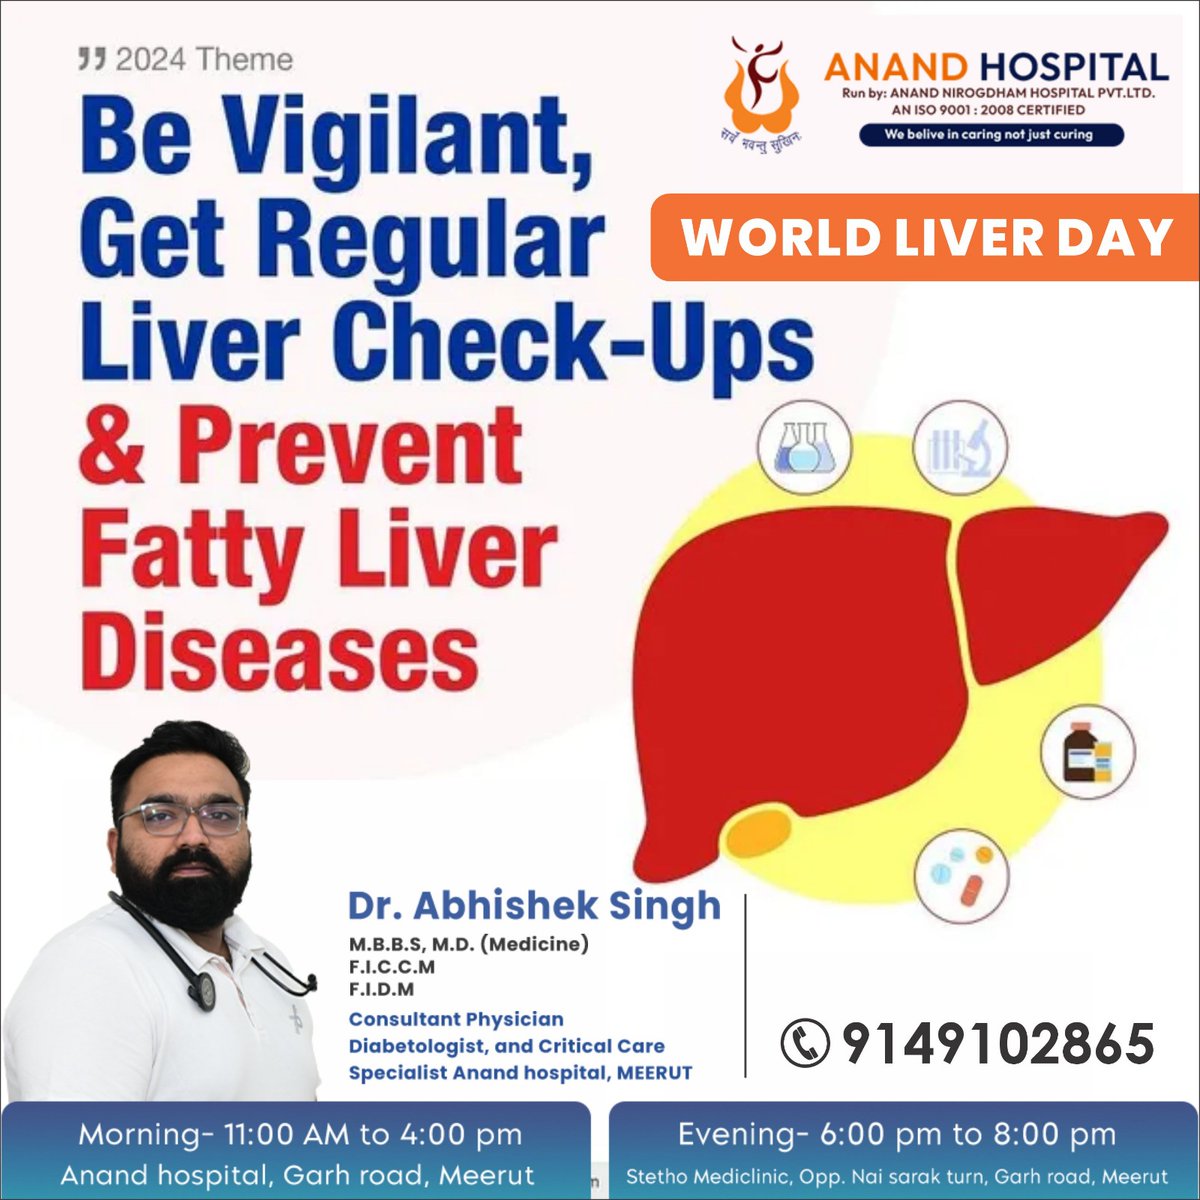 𝐖𝐨𝐫𝐥𝐝 𝐋𝐢𝐯𝐞𝐫 𝐃𝐚𝐲
Be Vigilant, Get Regular Liver Check-Ups & Prevent Fatty Liver Diseases
.
#LiverAwareness #Detox #Wellness #HealthyChoices #BodyAppreciation #SelfCare
#NourishYourBody #Cleanse #StayHealthy #BodyHarmony